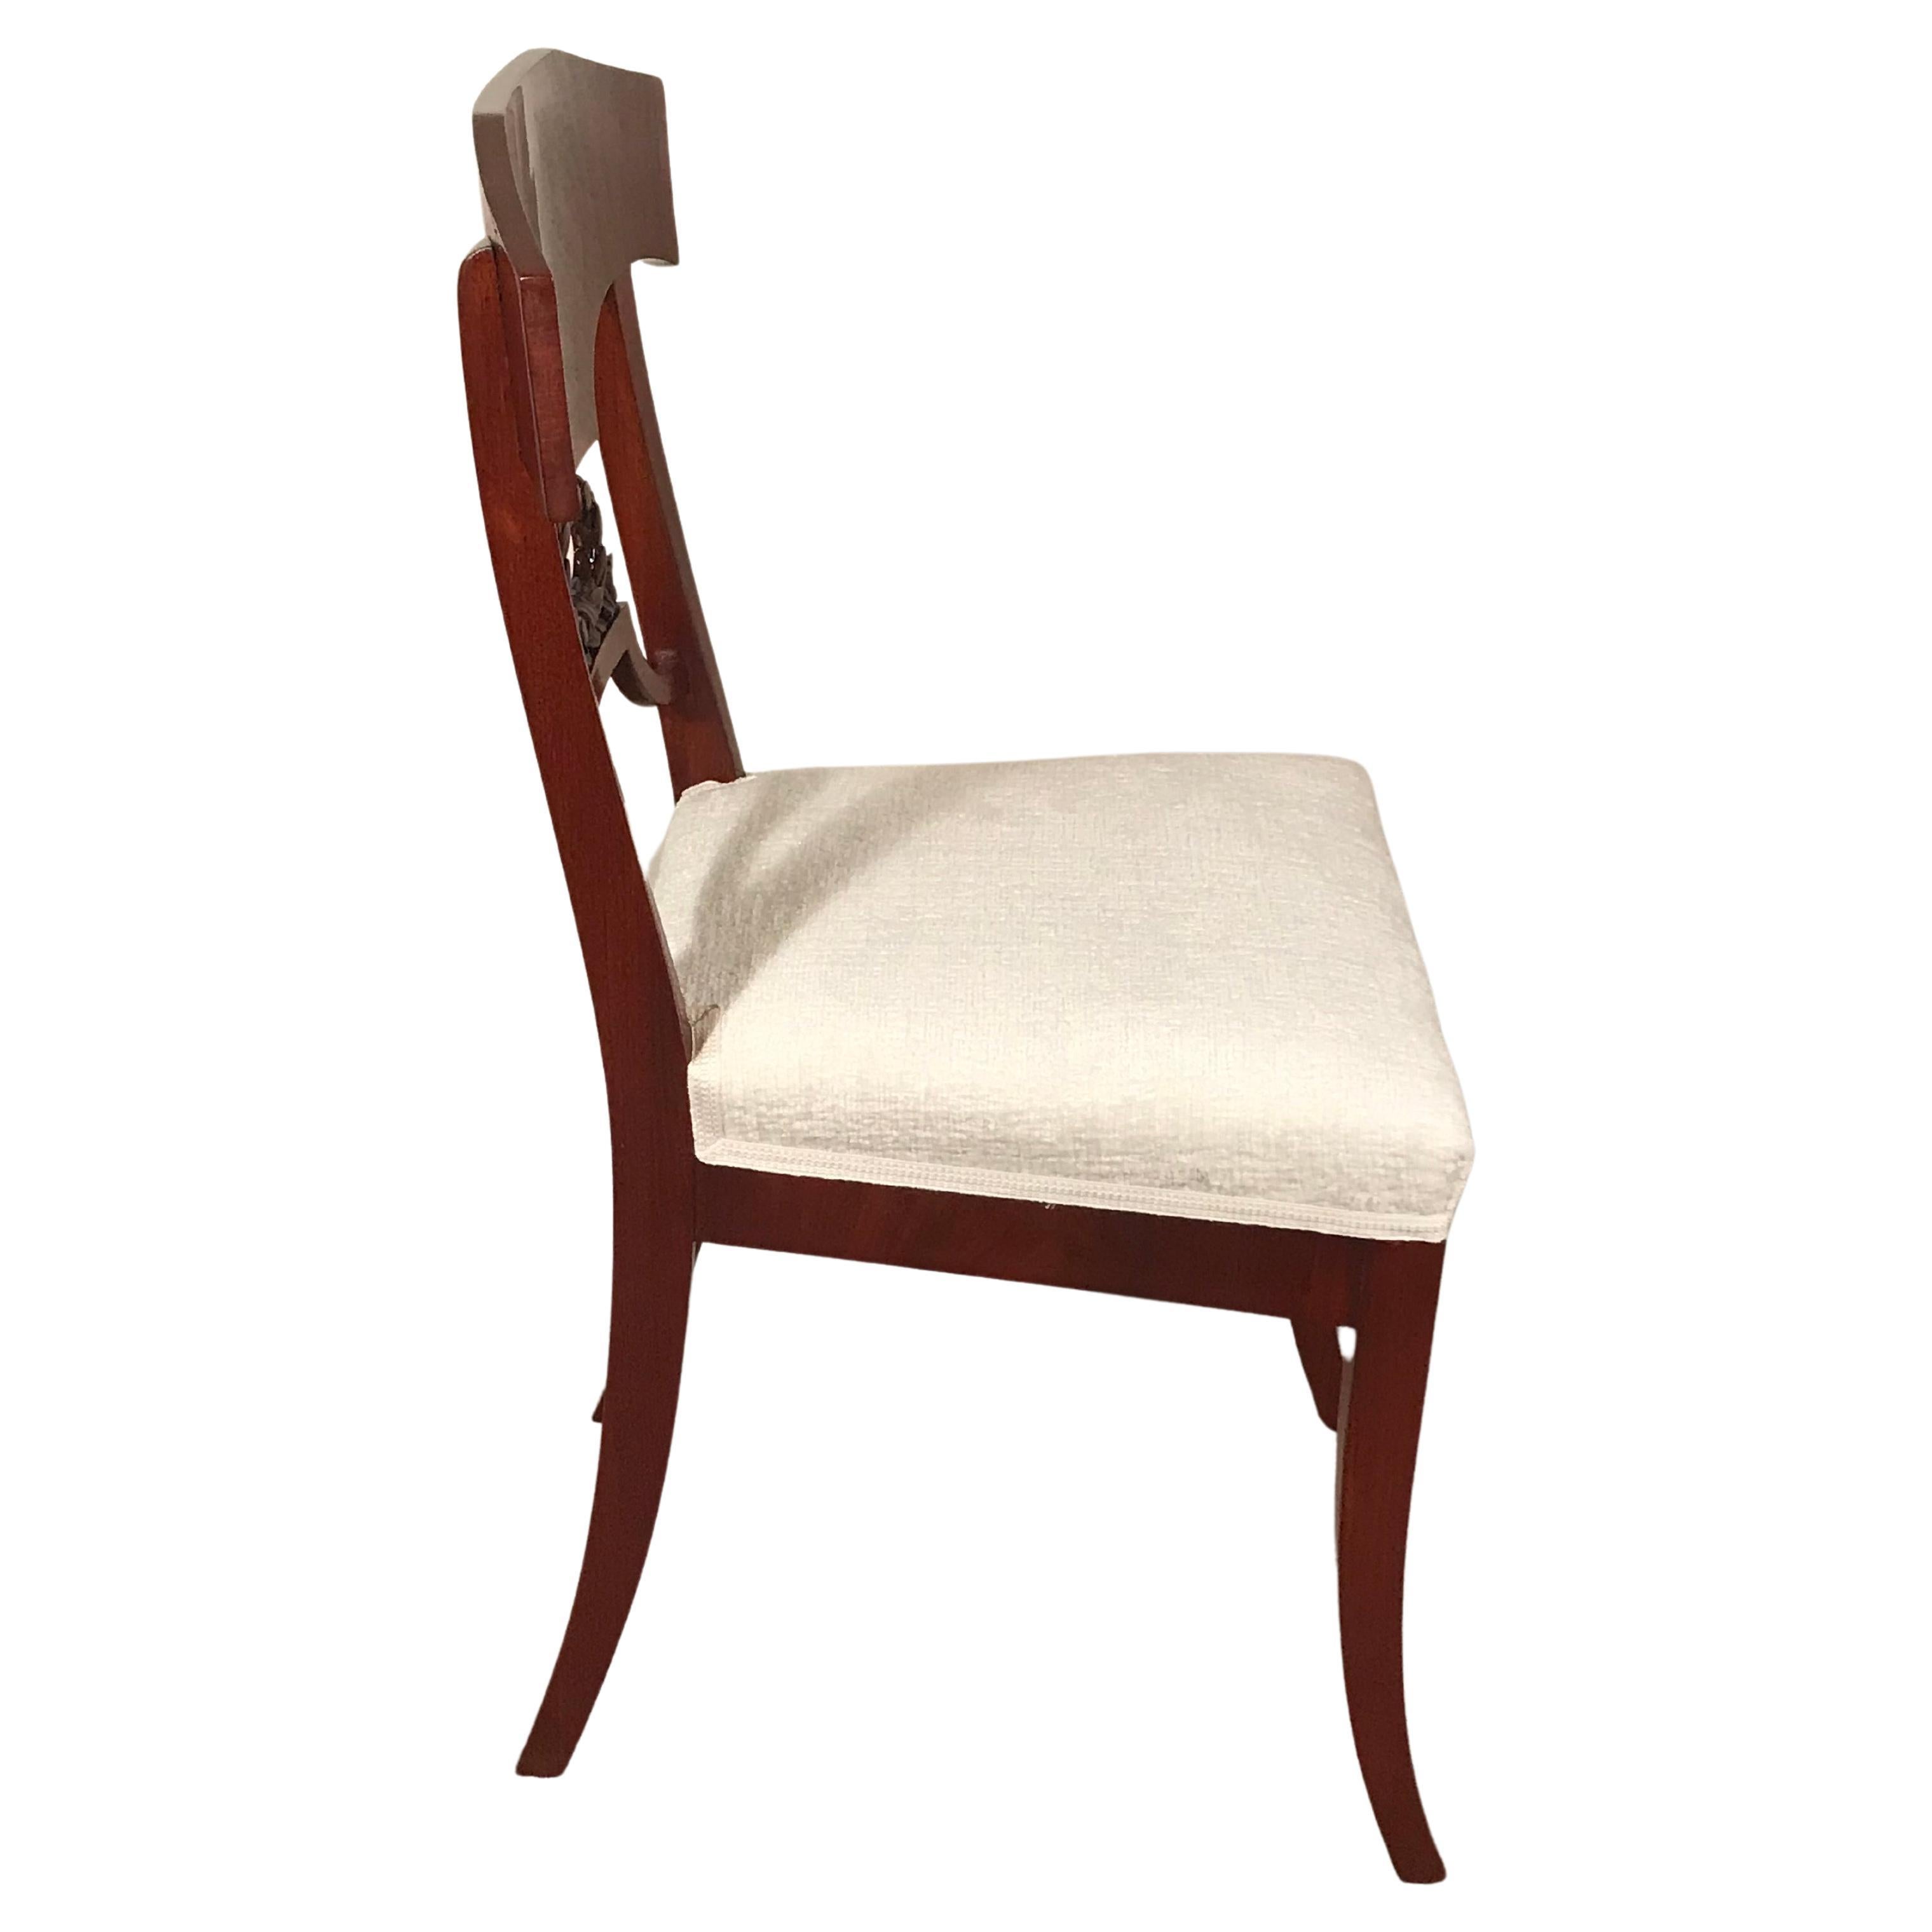 Explore the refined charm of this pair of Swedish Gustavian Side Chairs, dating back to the period around 1820-30. With slender legs and a delightful mahogany veneer, these chairs epitomize the grace of the Gustavian style. Adorned with a laurel